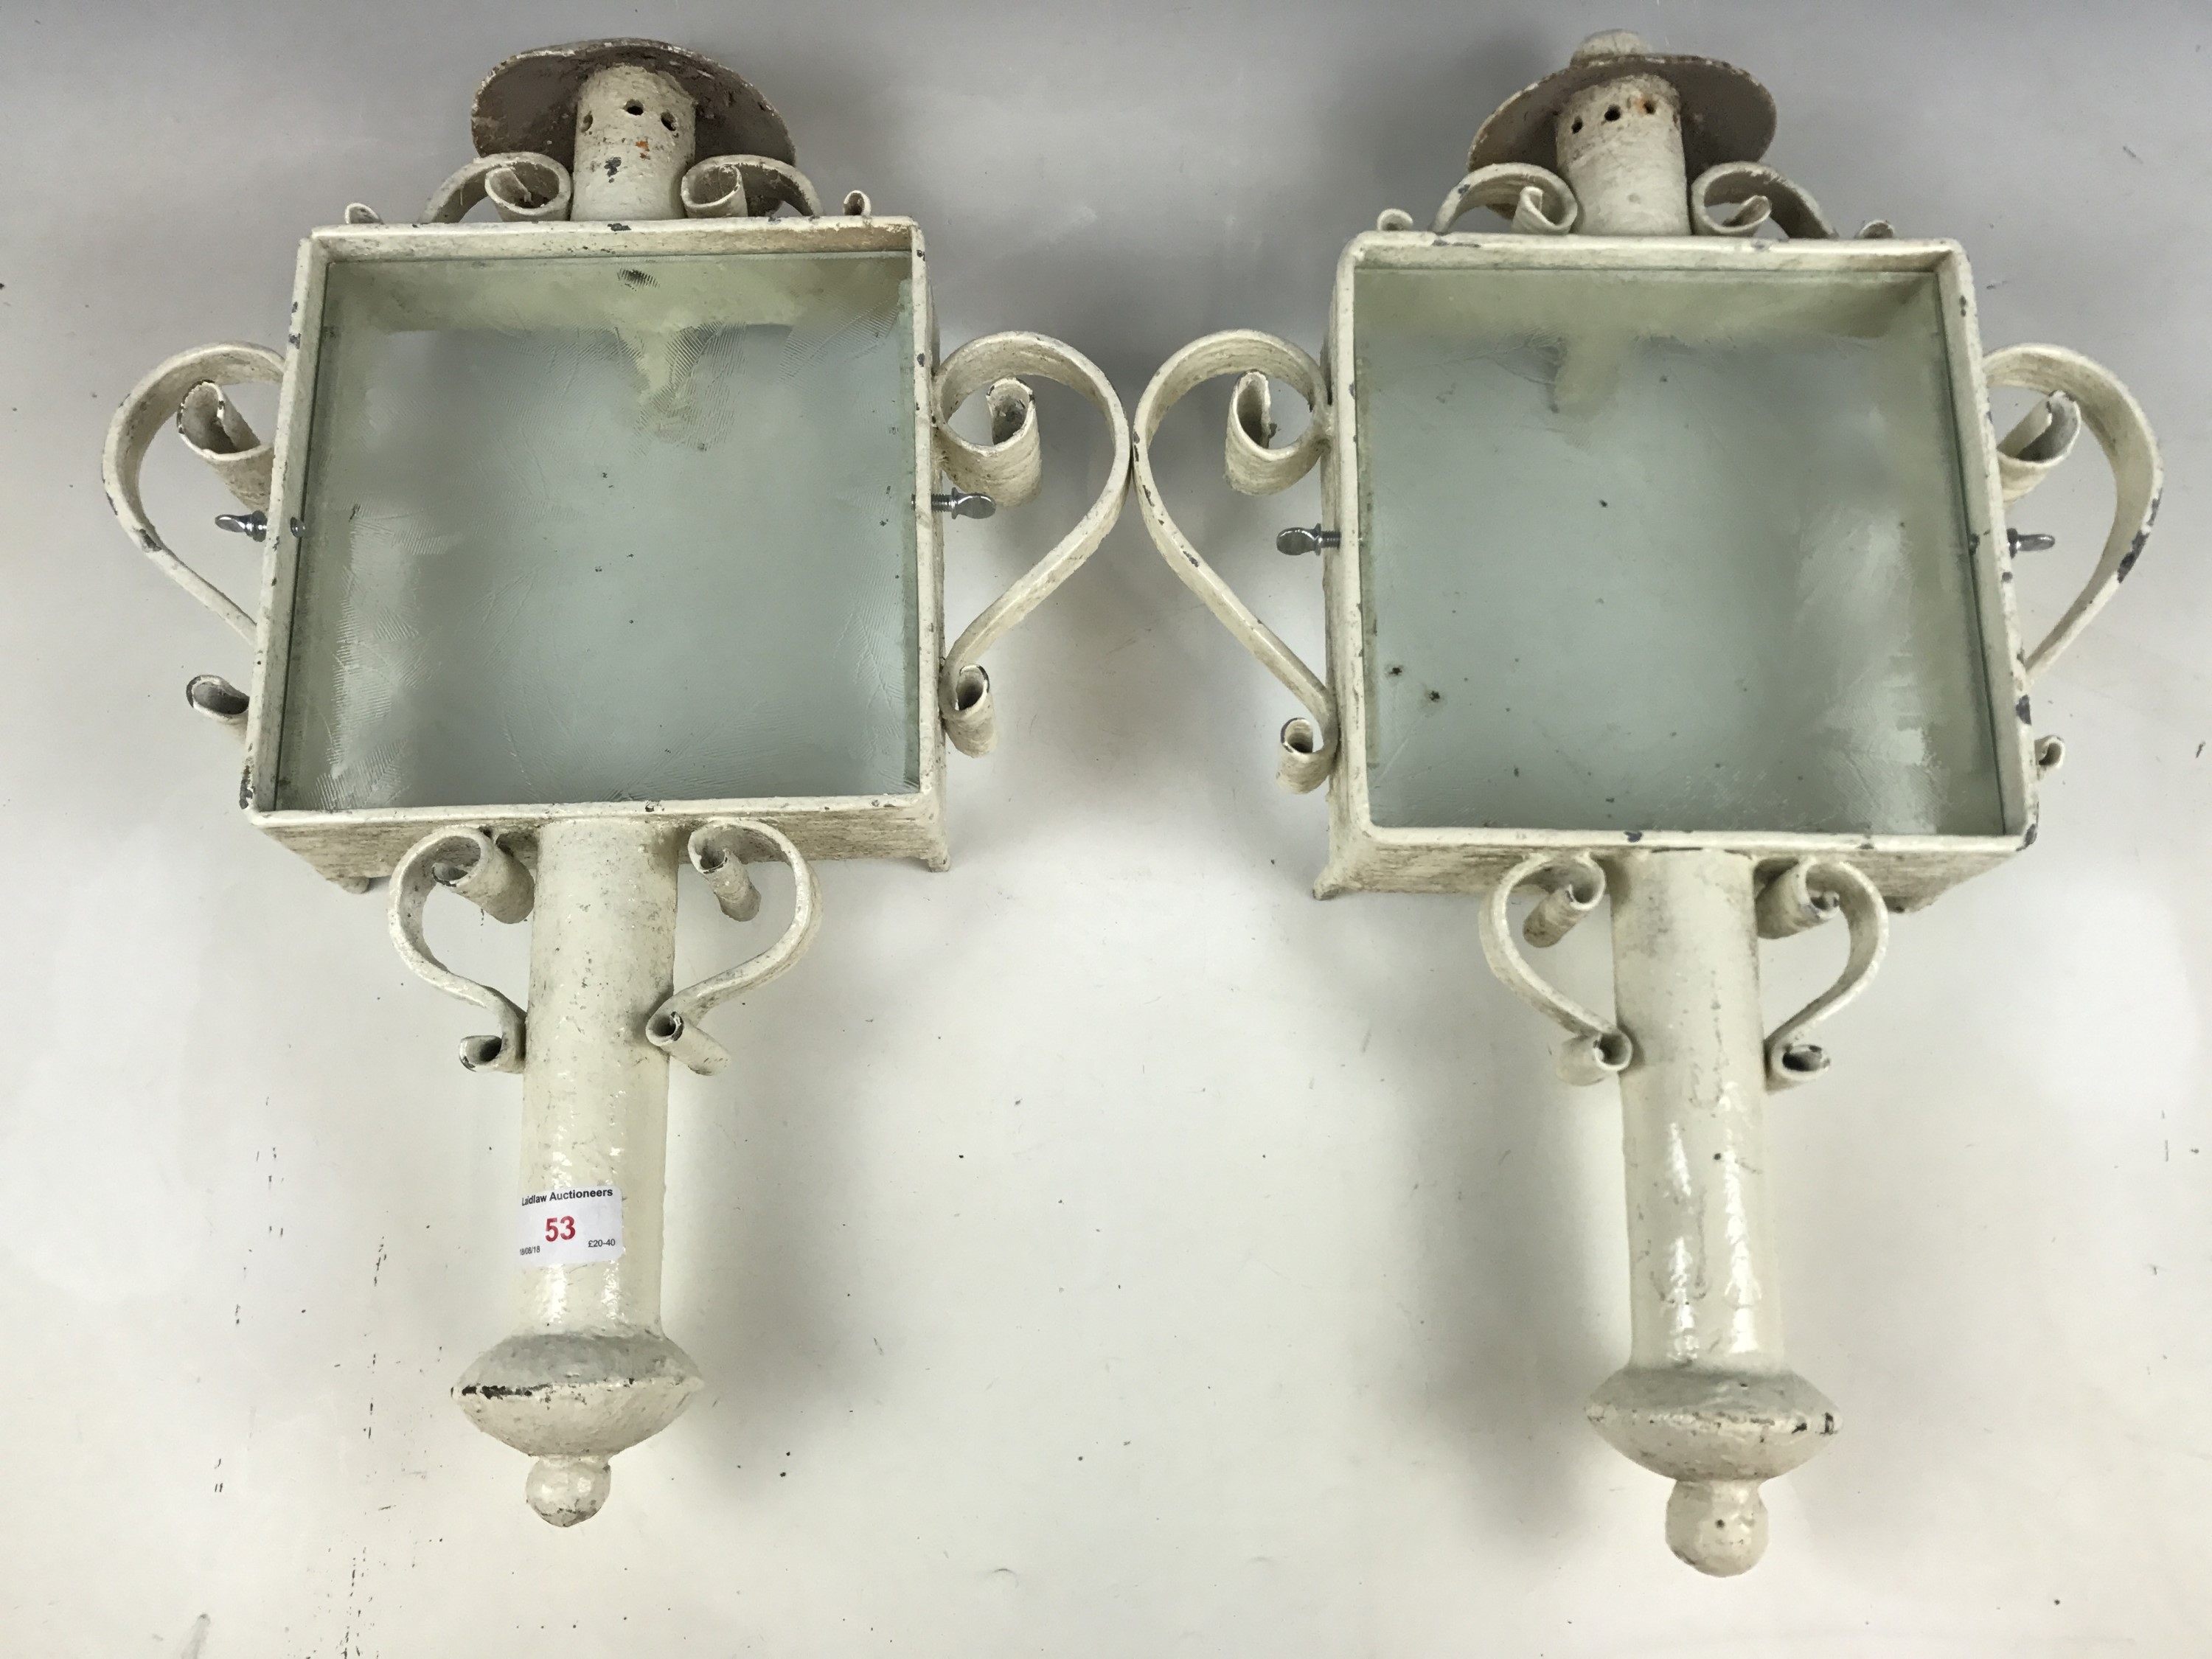 Two wrought-iron and glass exterior light sconces